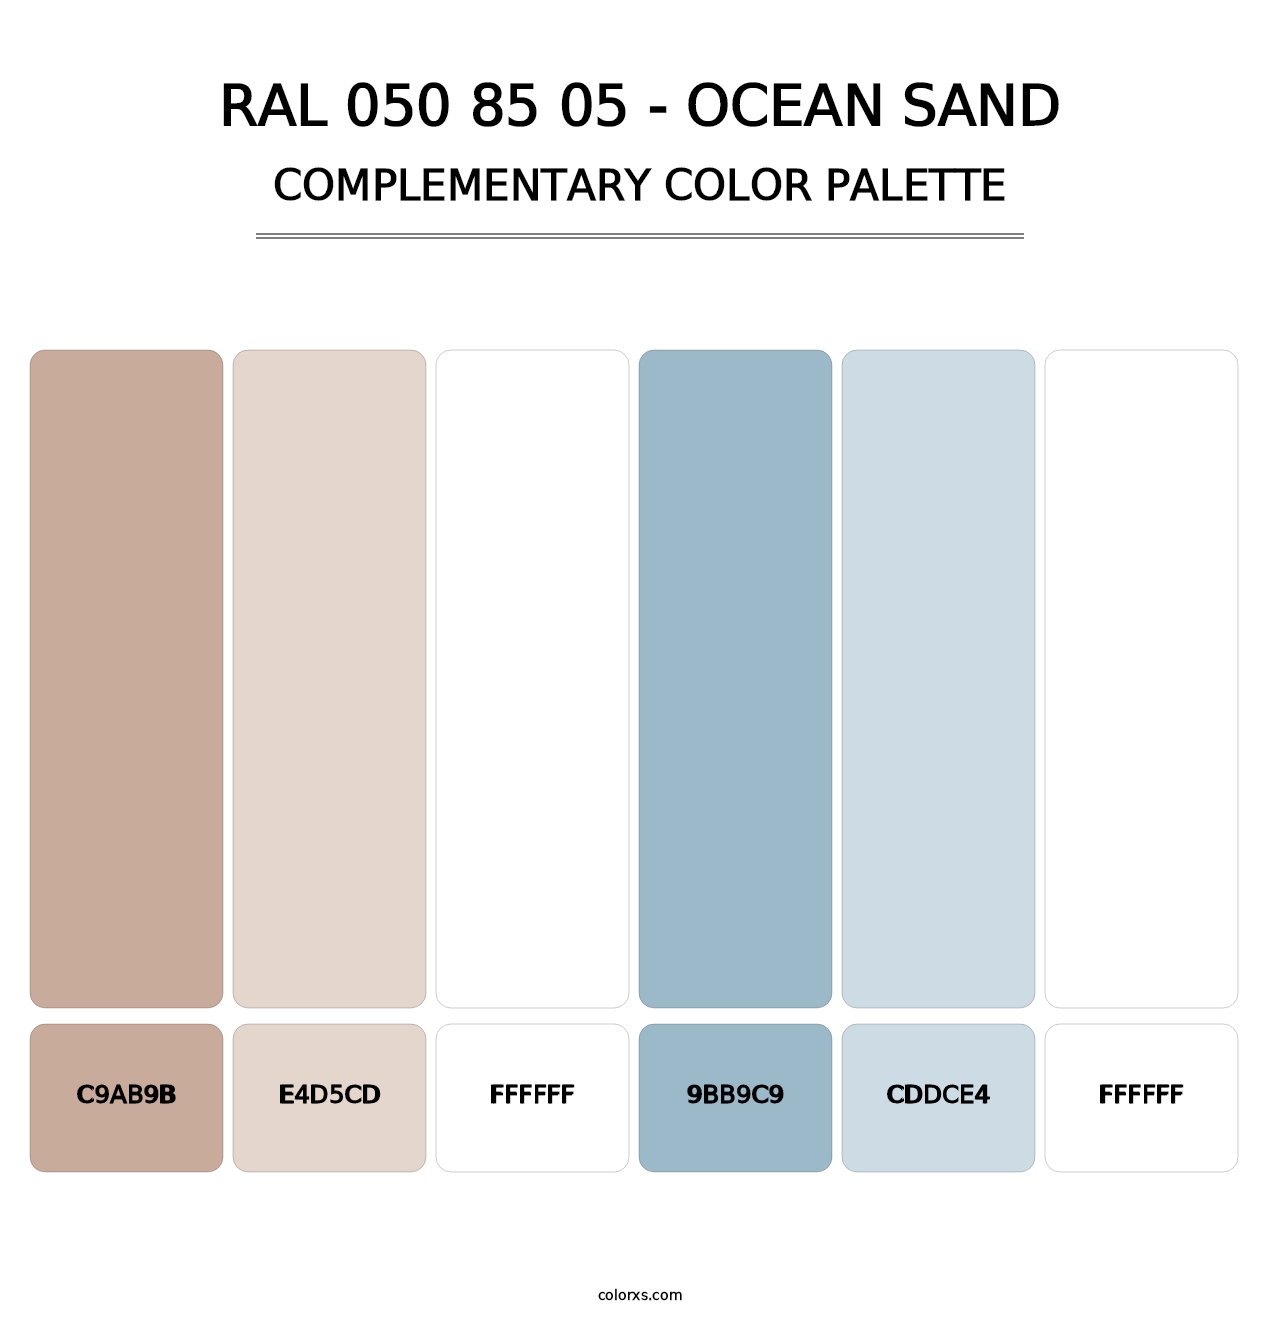 RAL 050 85 05 - Ocean Sand - Complementary Color Palette